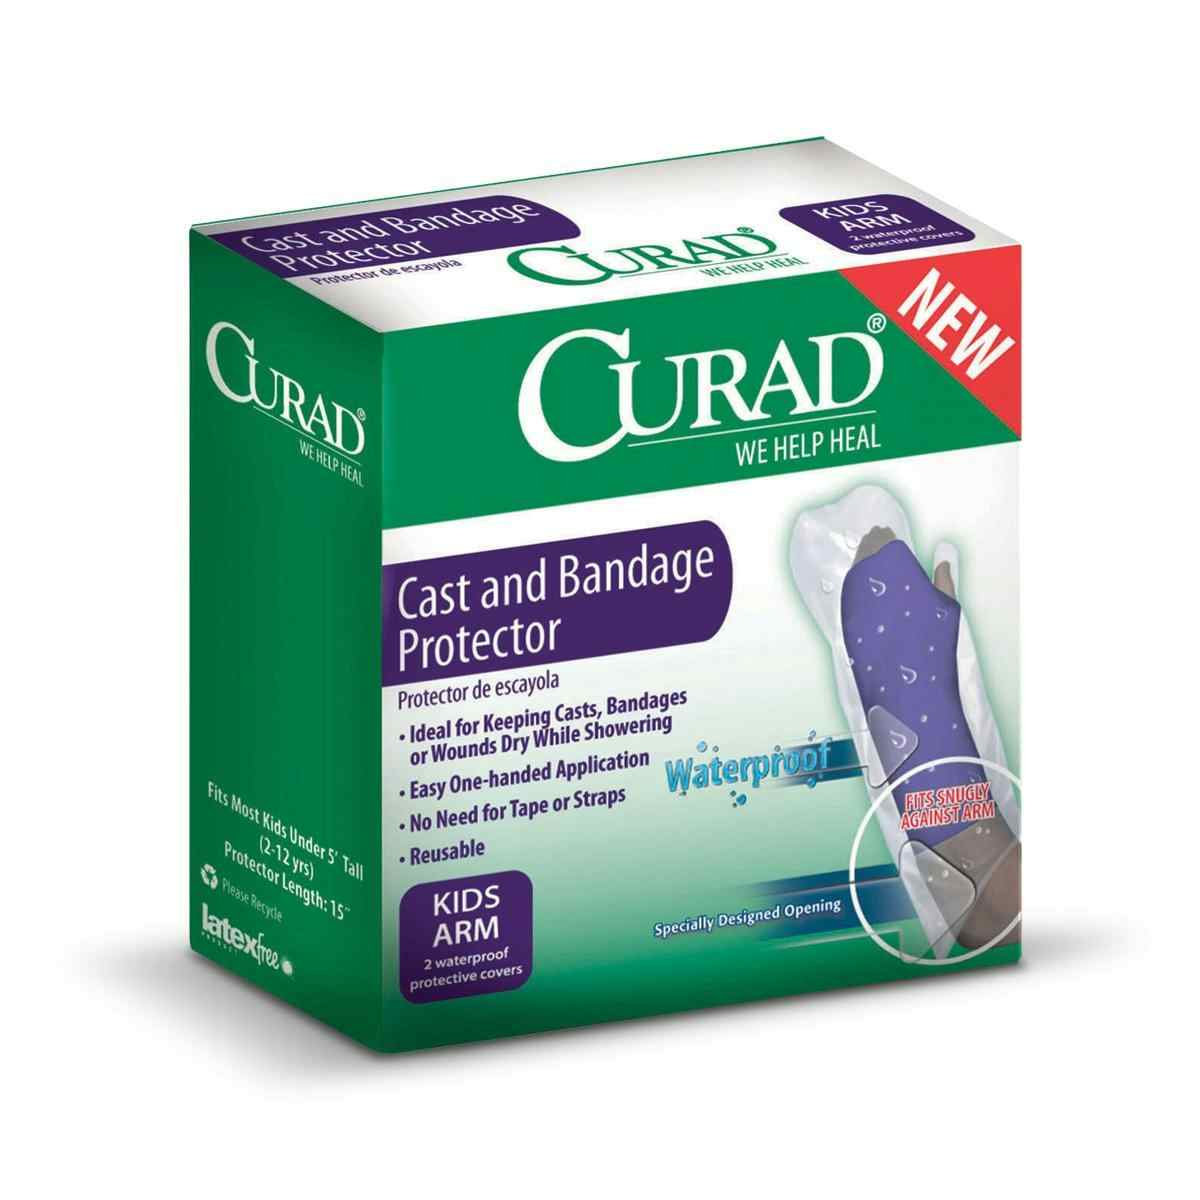 Curad Cast and Bandage Protector for Arms